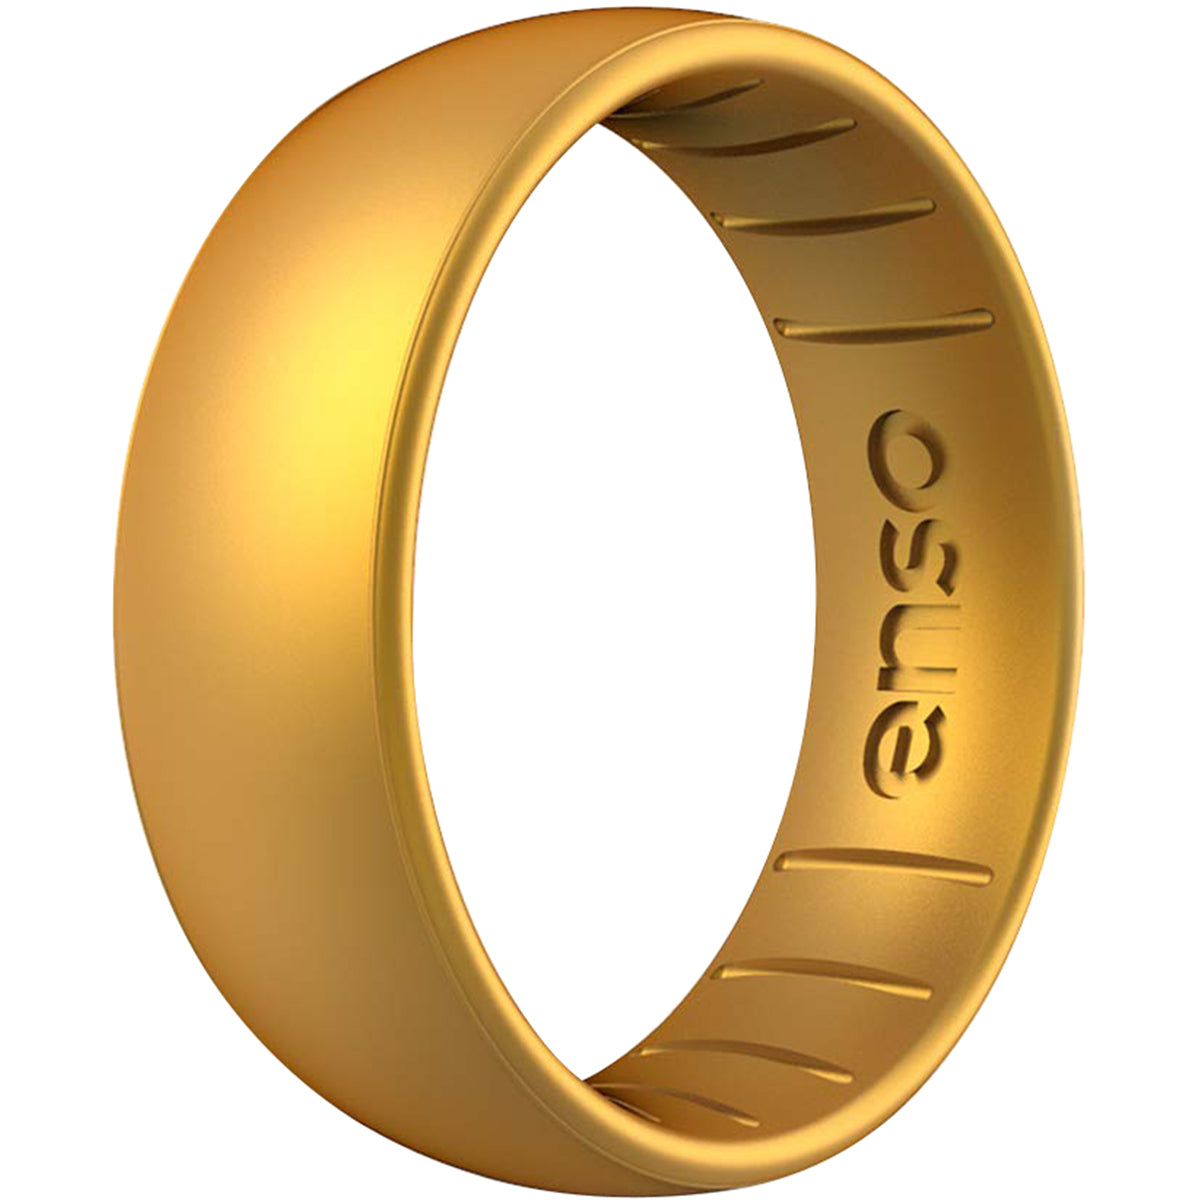 Enso Rings Classic Elements Series Silicone Ring - Gold Enso Rings